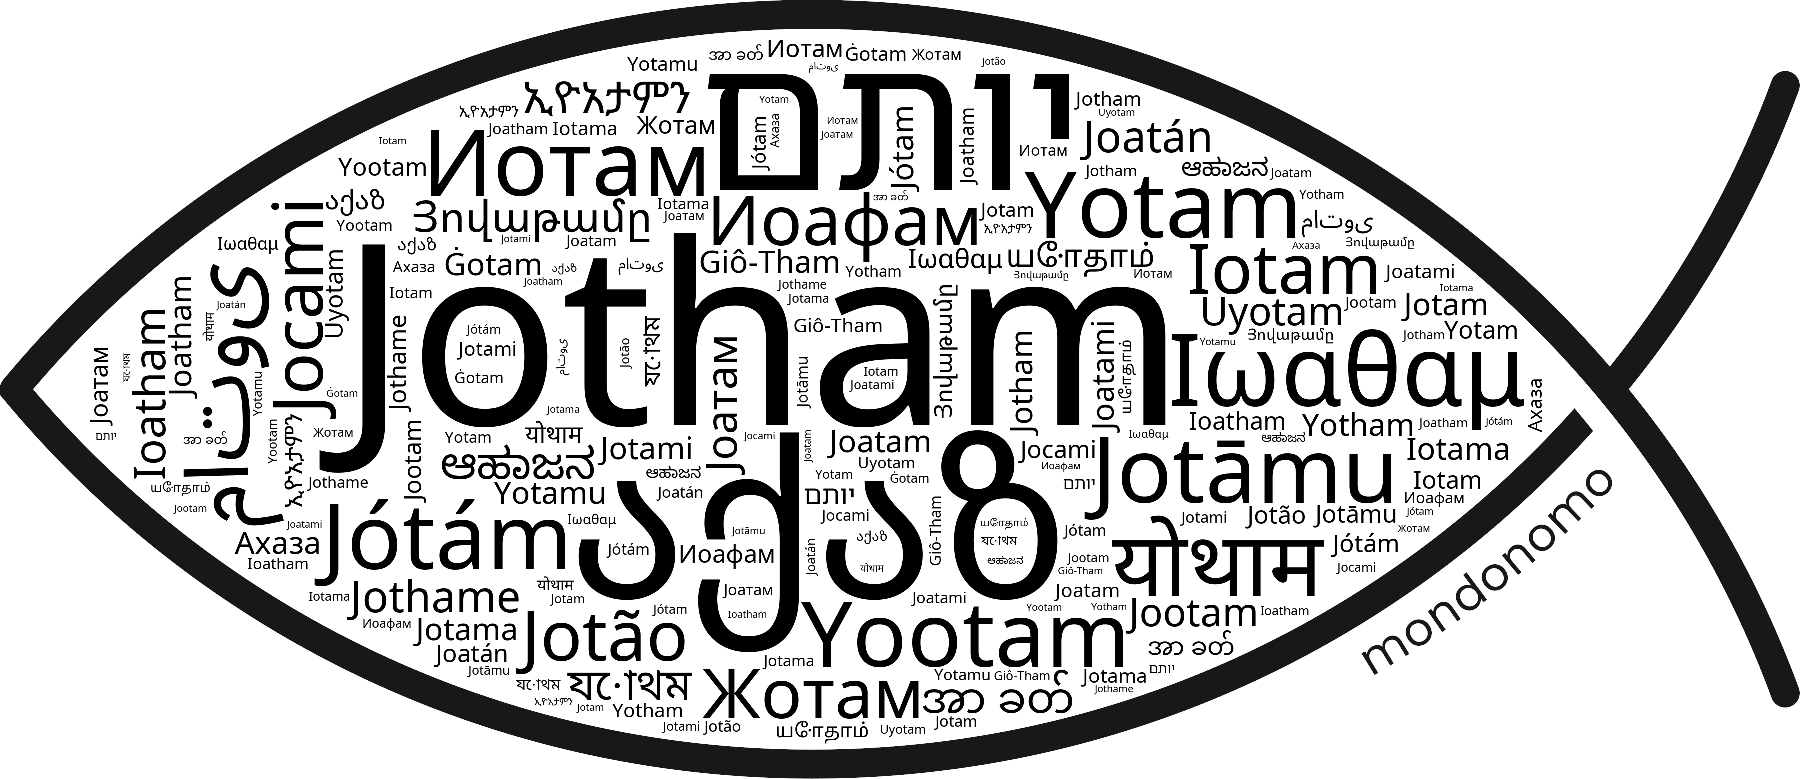 Name Jotham in the world's Bibles